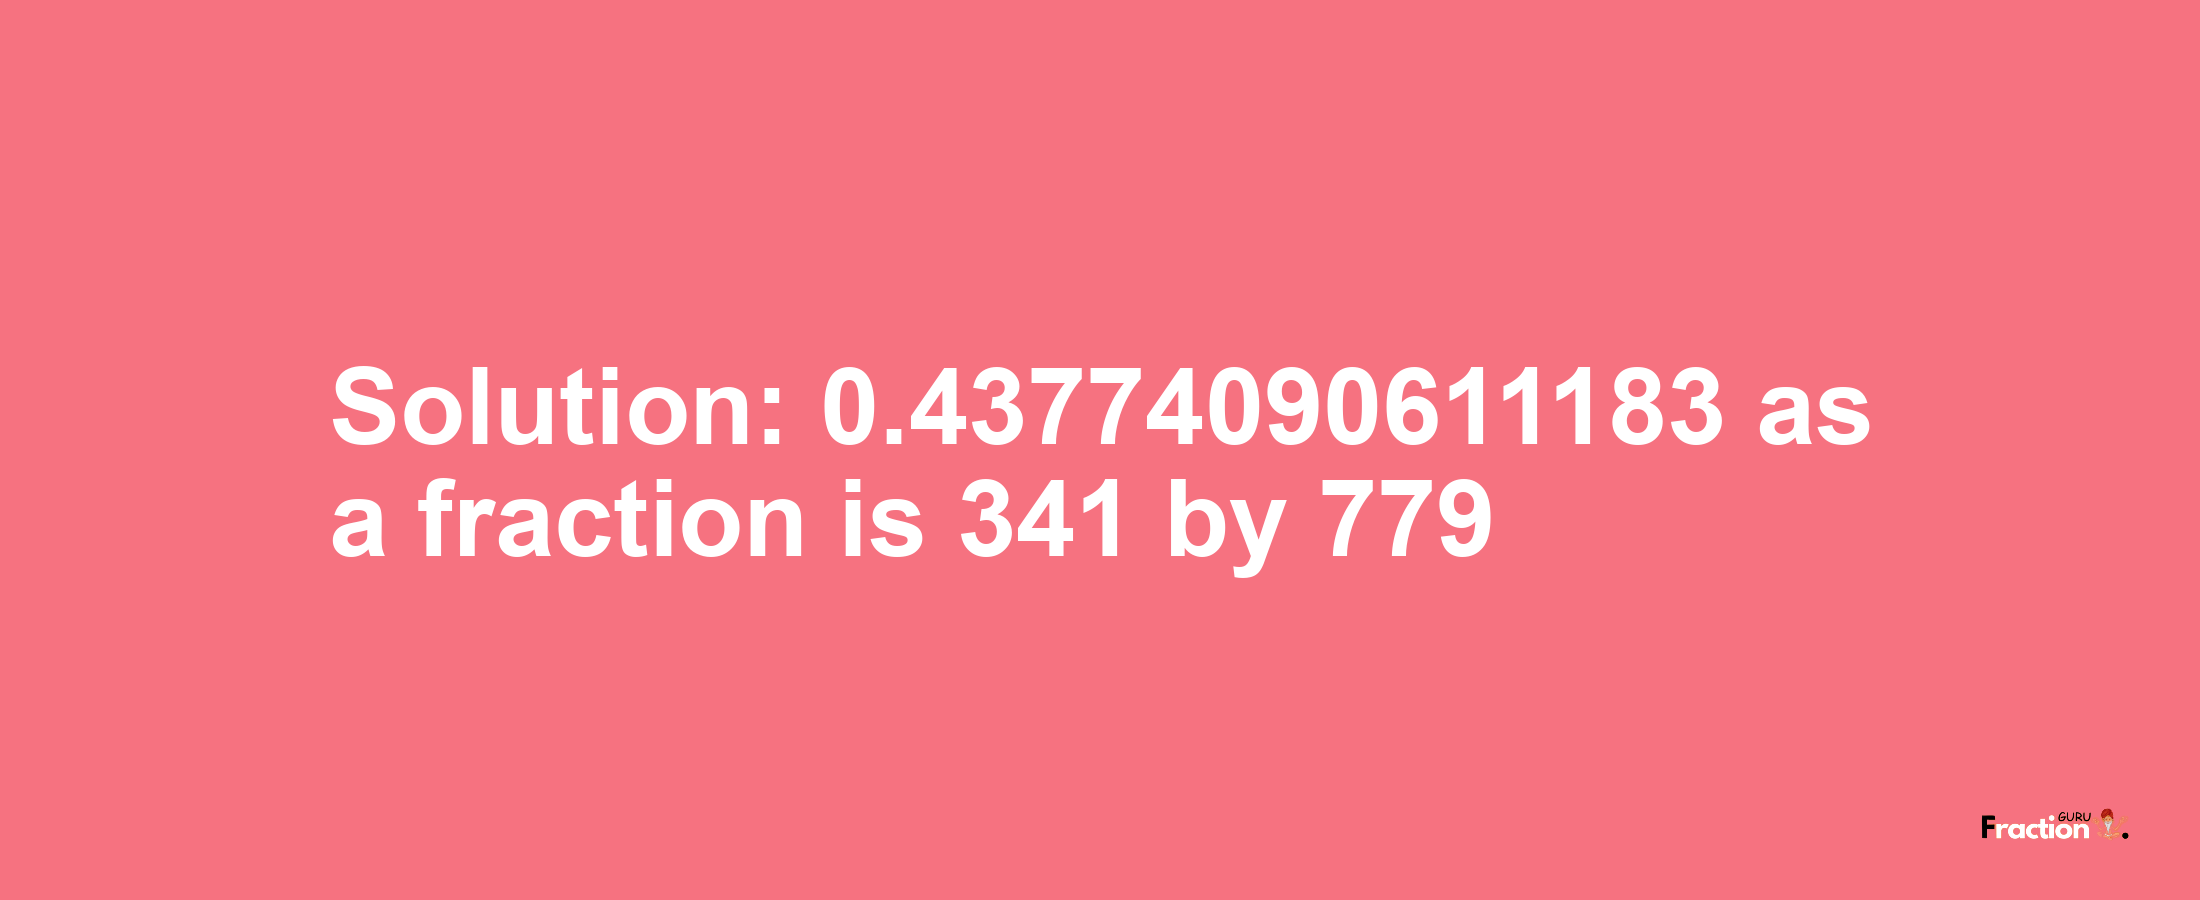 Solution:0.43774090611183 as a fraction is 341/779